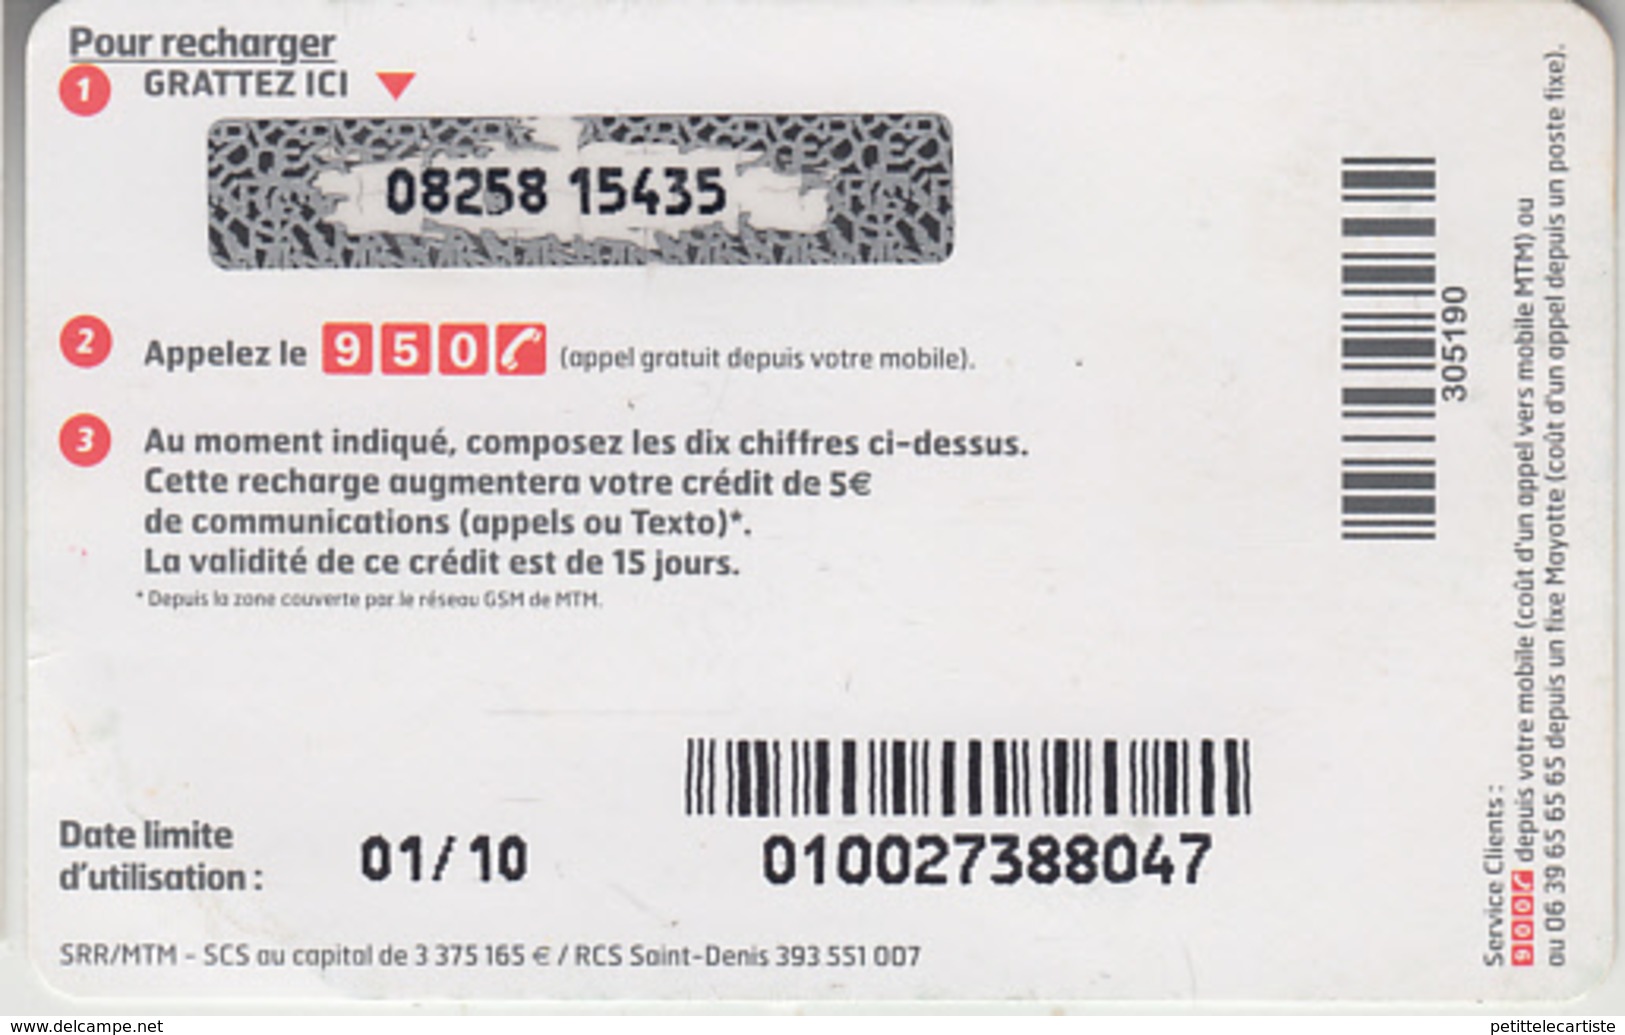 MAYOTTE - TÉLÉCARTE - GSM DU MONDE *** RECHARGE GSM - SFR5 - 01/10 *** - TAAF - French Southern And Antarctic Lands